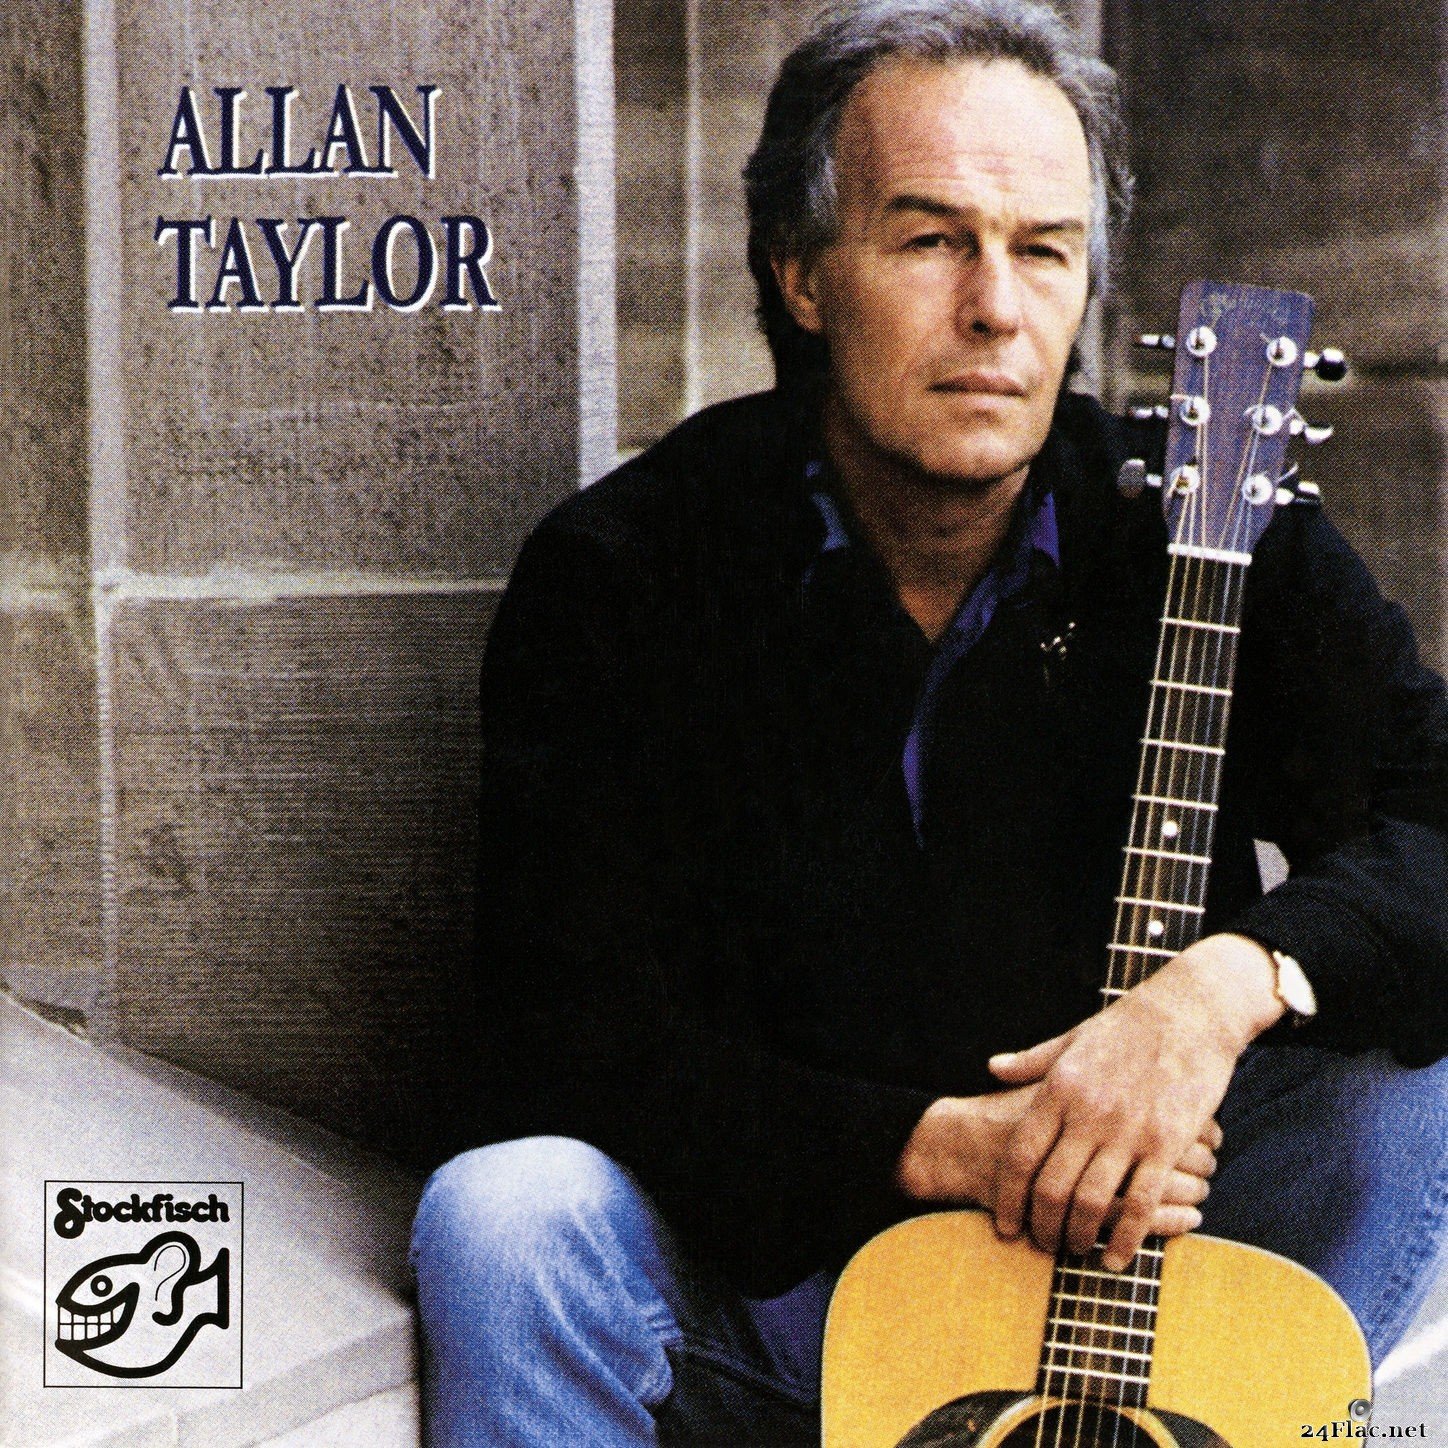 Allan Taylor - Looking For You (Remastered) (2021) Hi-Res